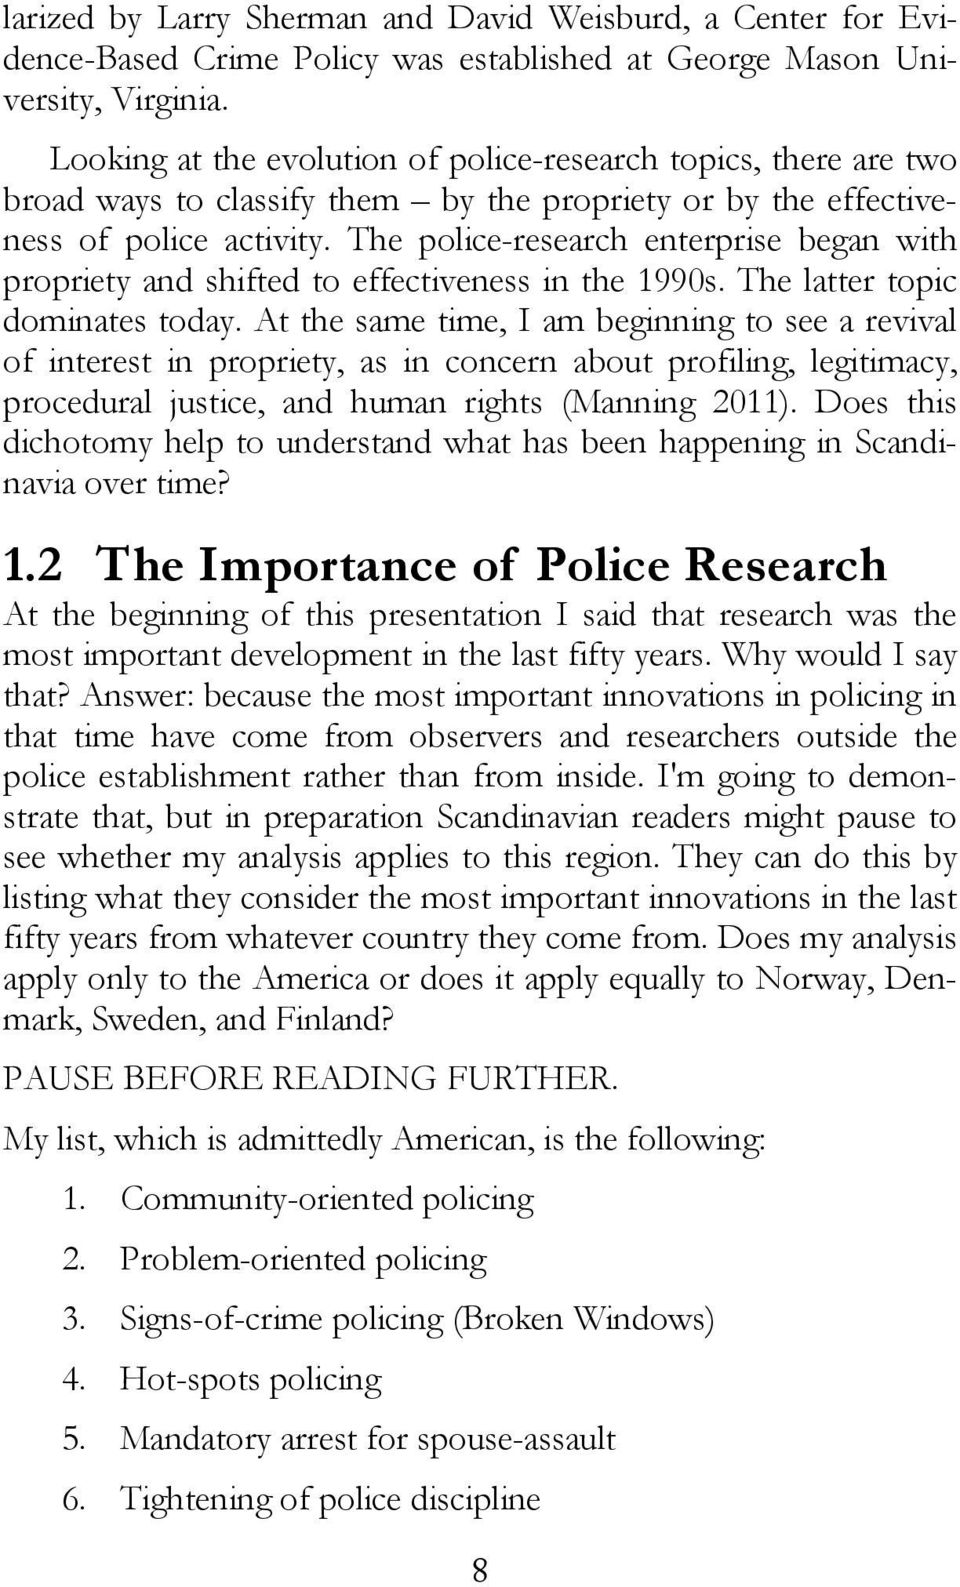 The police-research enterprise began with propriety and shifted to effectiveness in the 1990s. The latter topic dominates today.